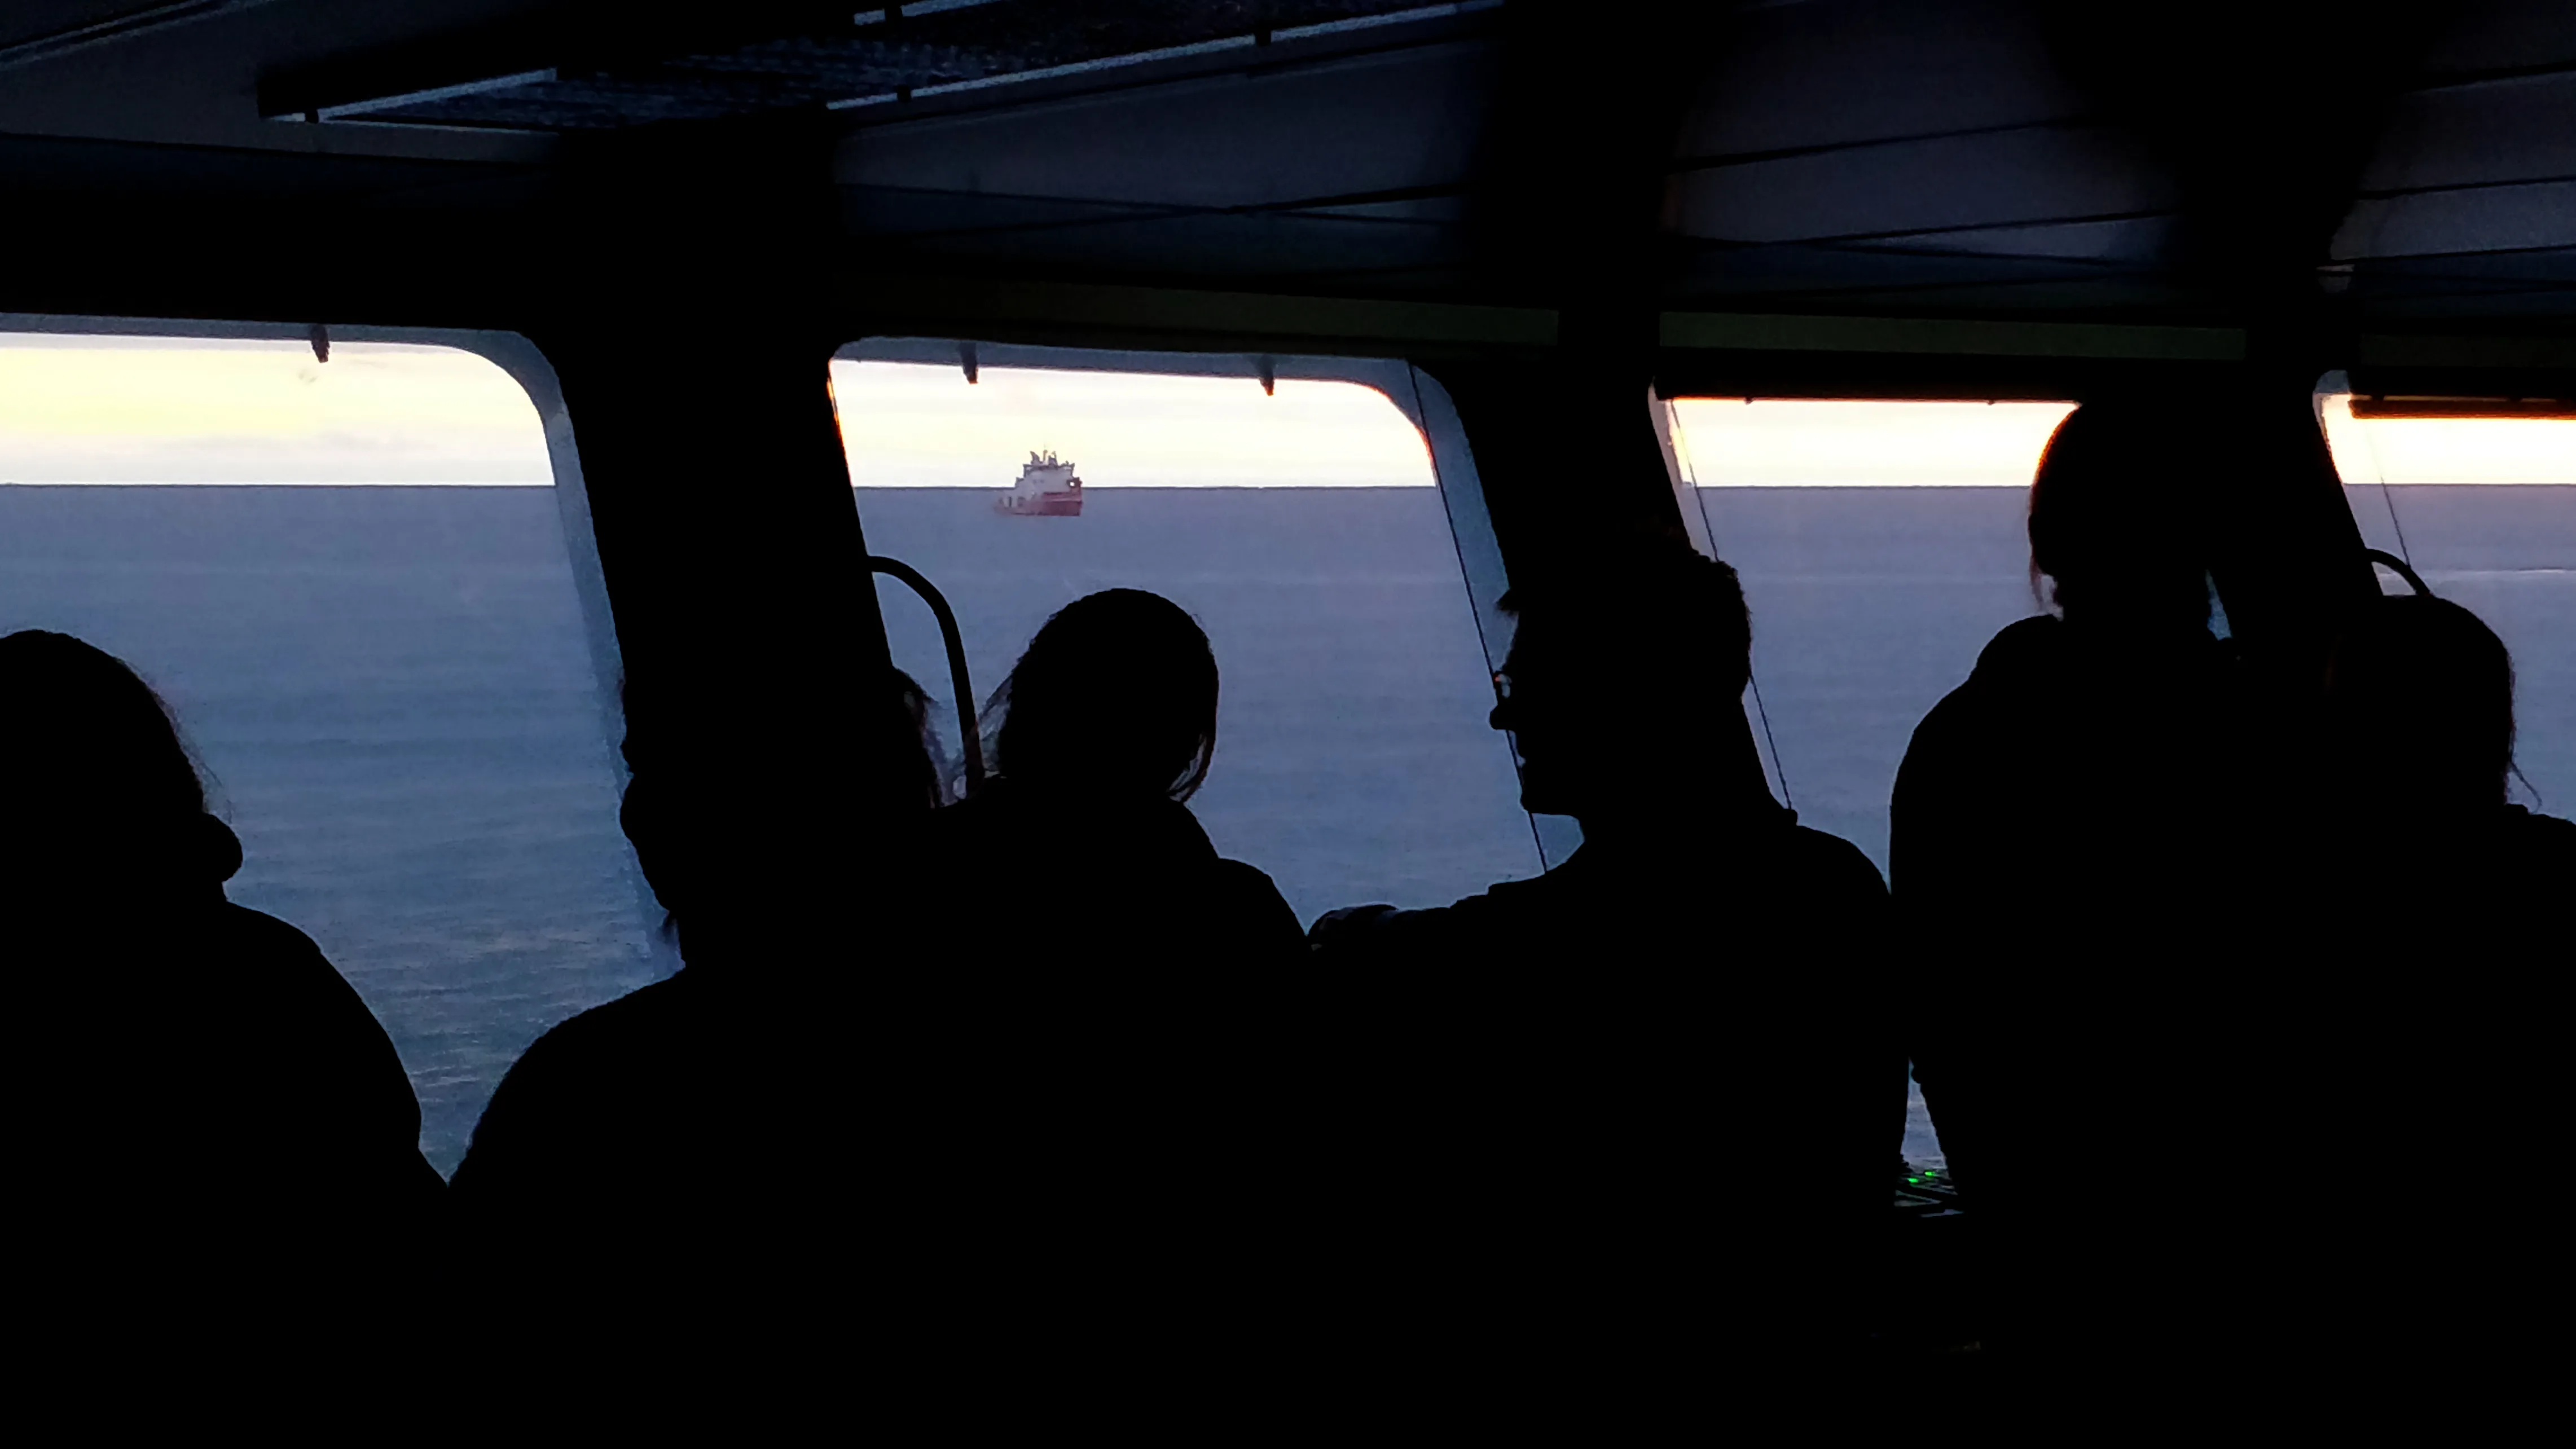 View of a red ship through the windows of a ships bridge. Many people are watching, all in silhouette against the windows.